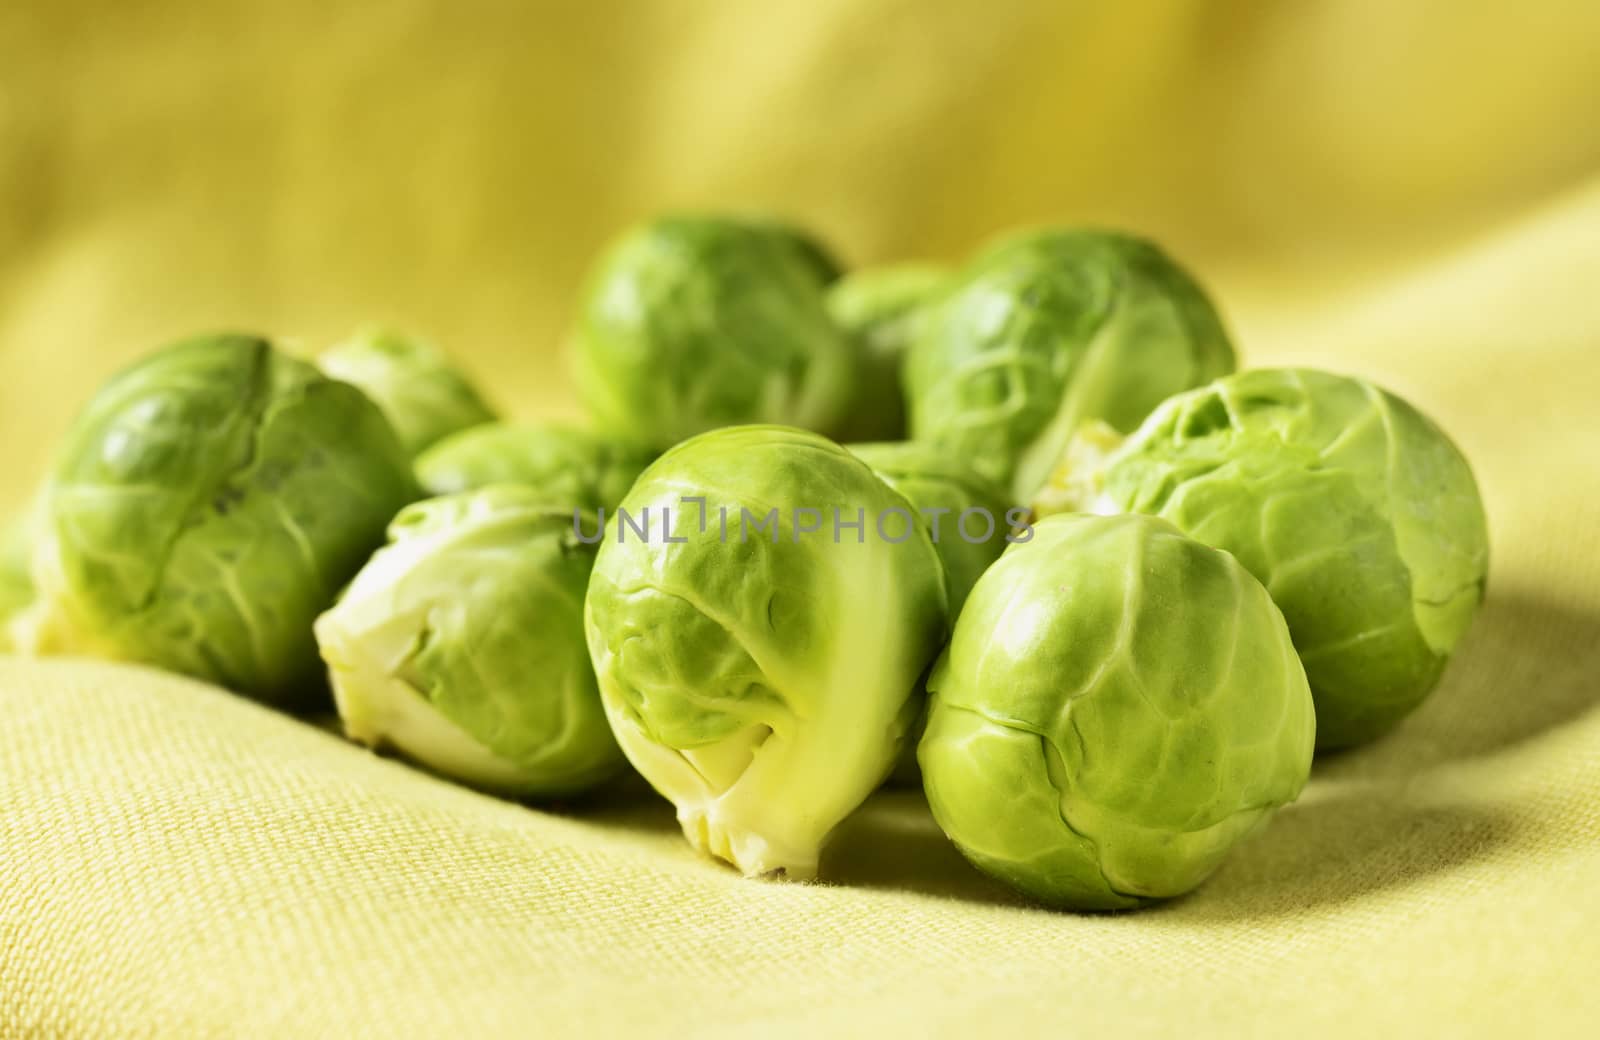 Brussels sprouts by victimewalker